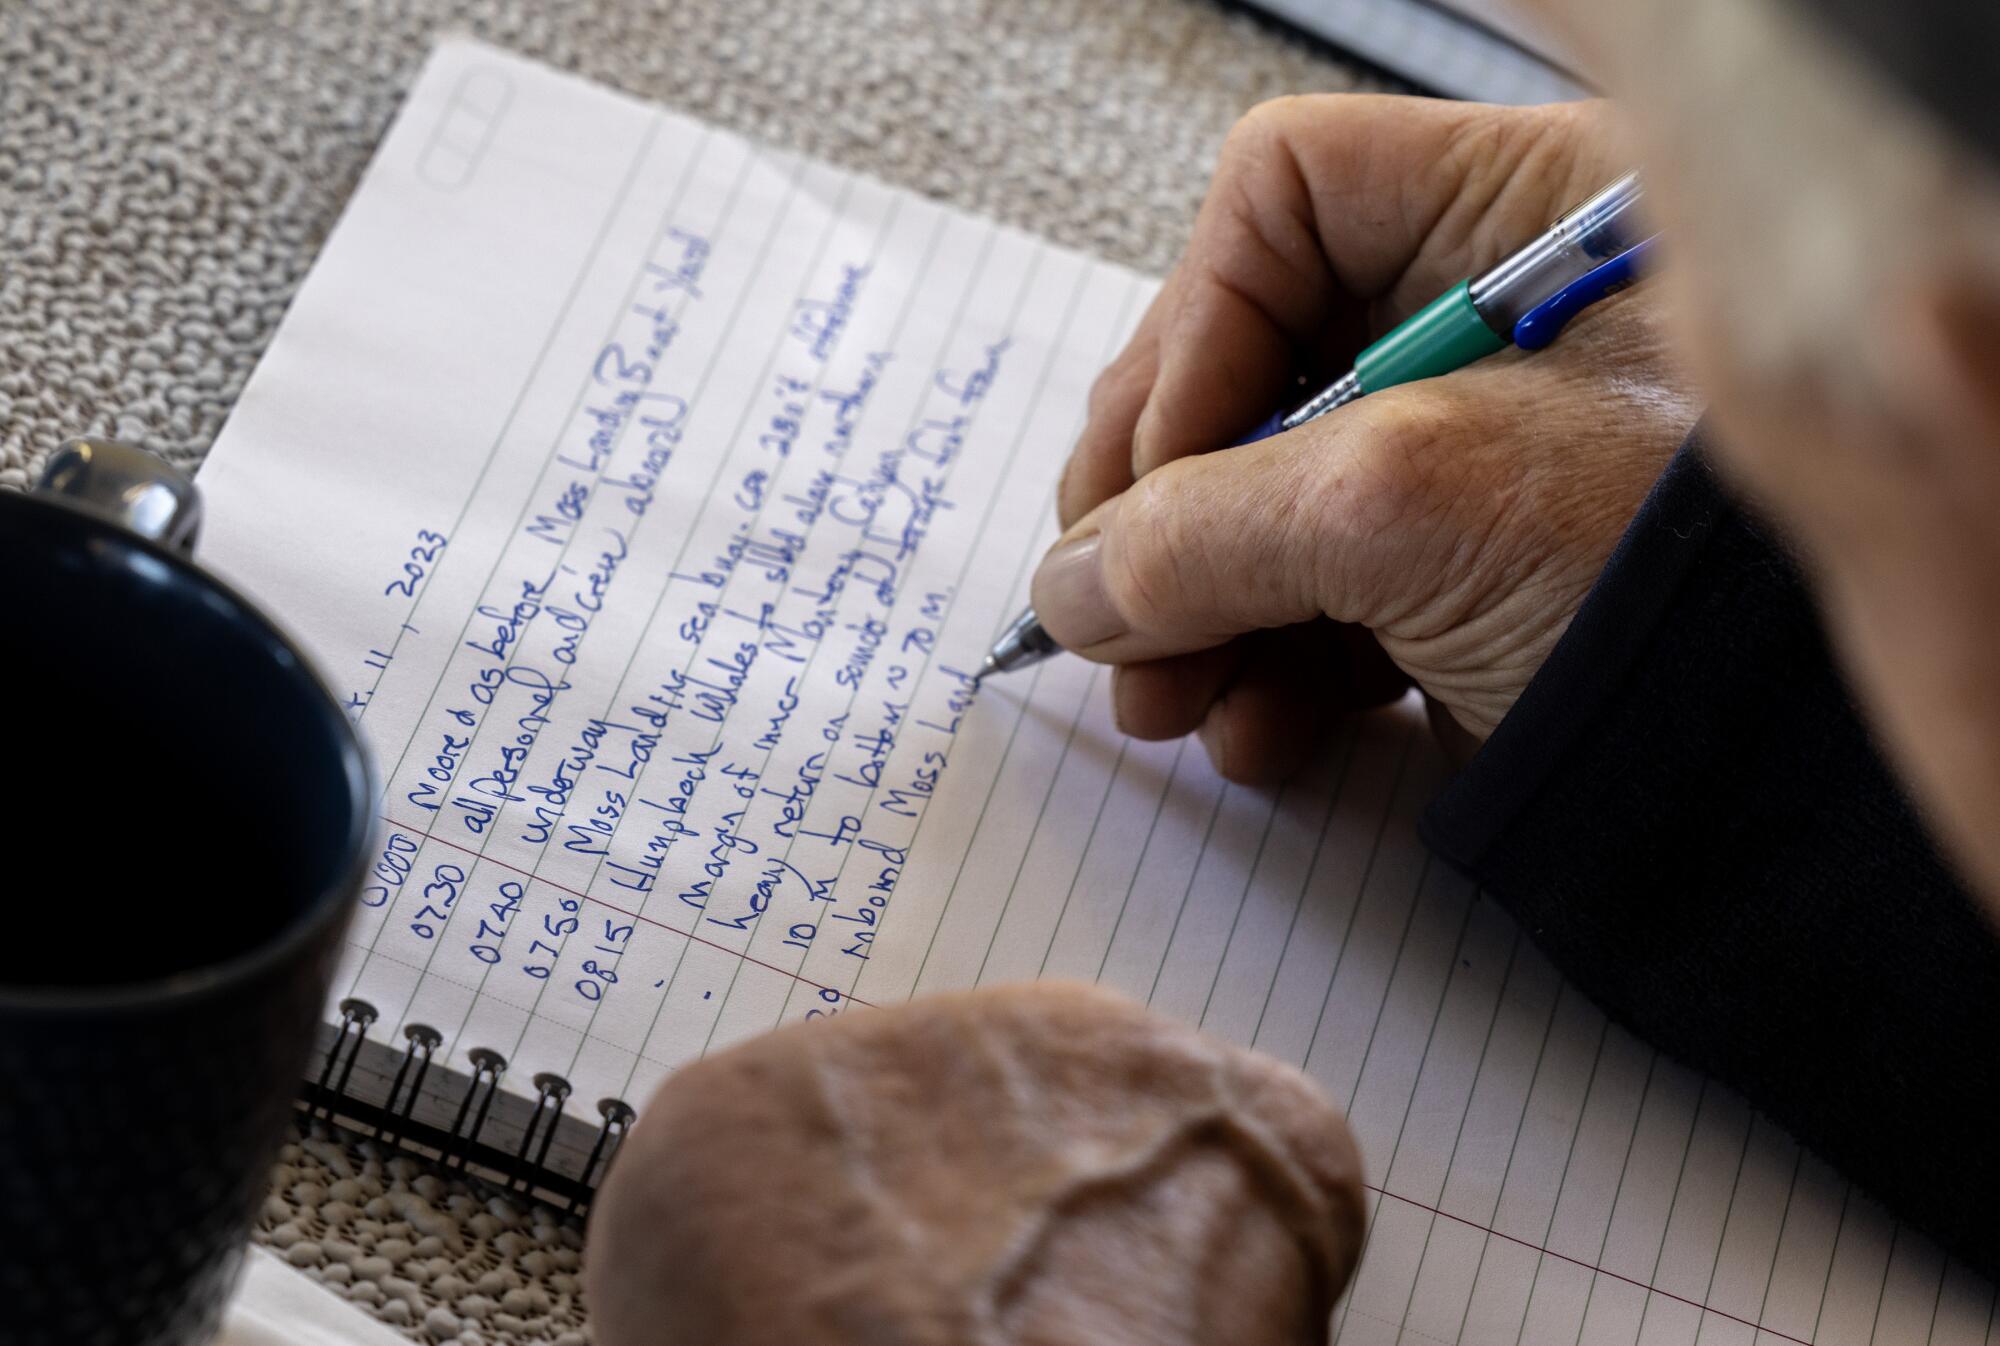 A close-up a man's hand writing on a notebook with a pen in blue ink.